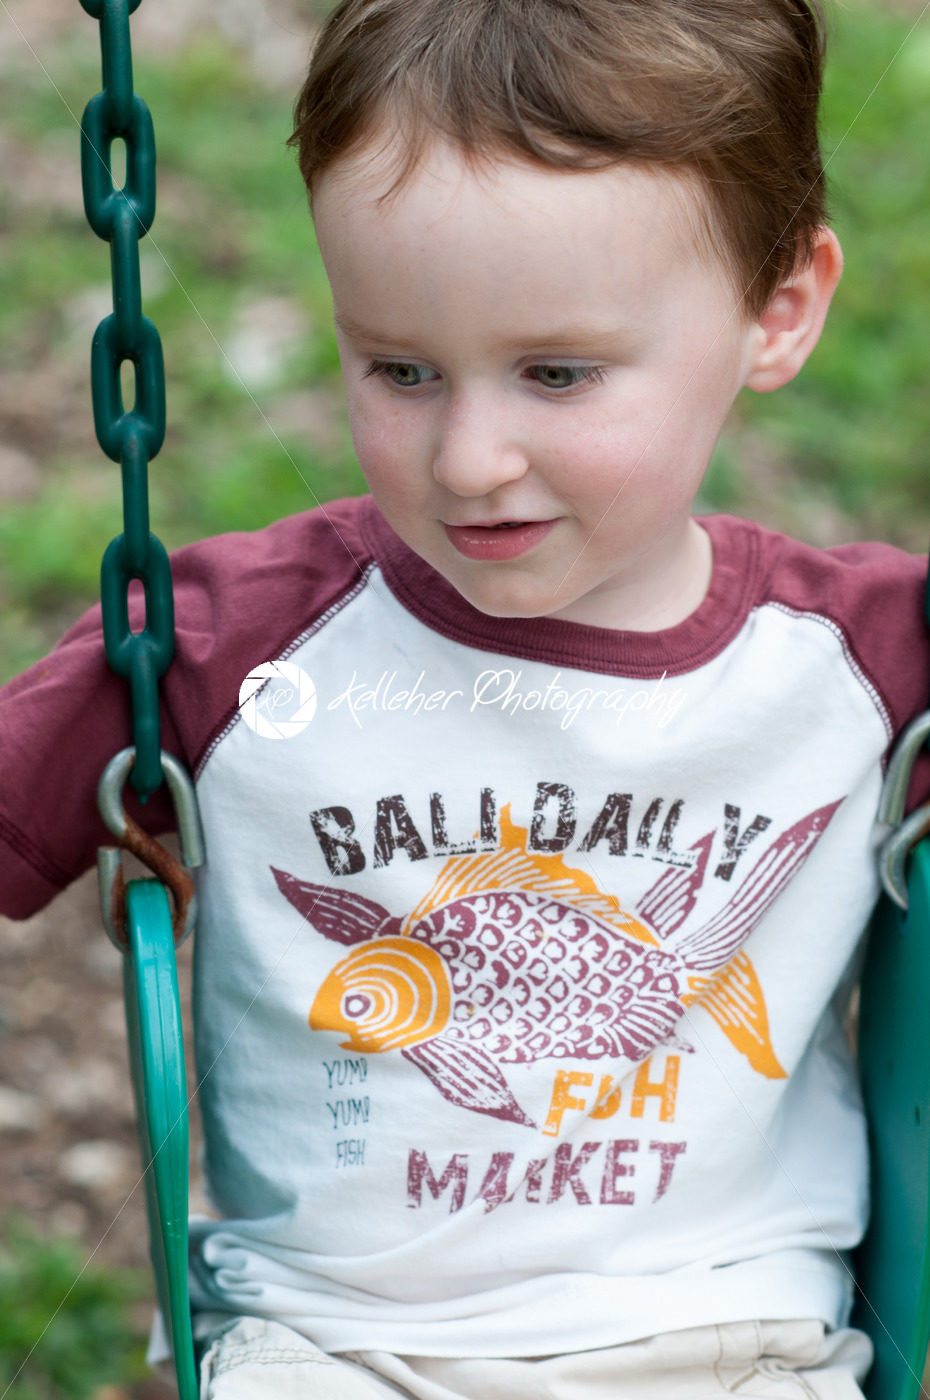 Young boy having fun on a swing - Kelleher Photography Store